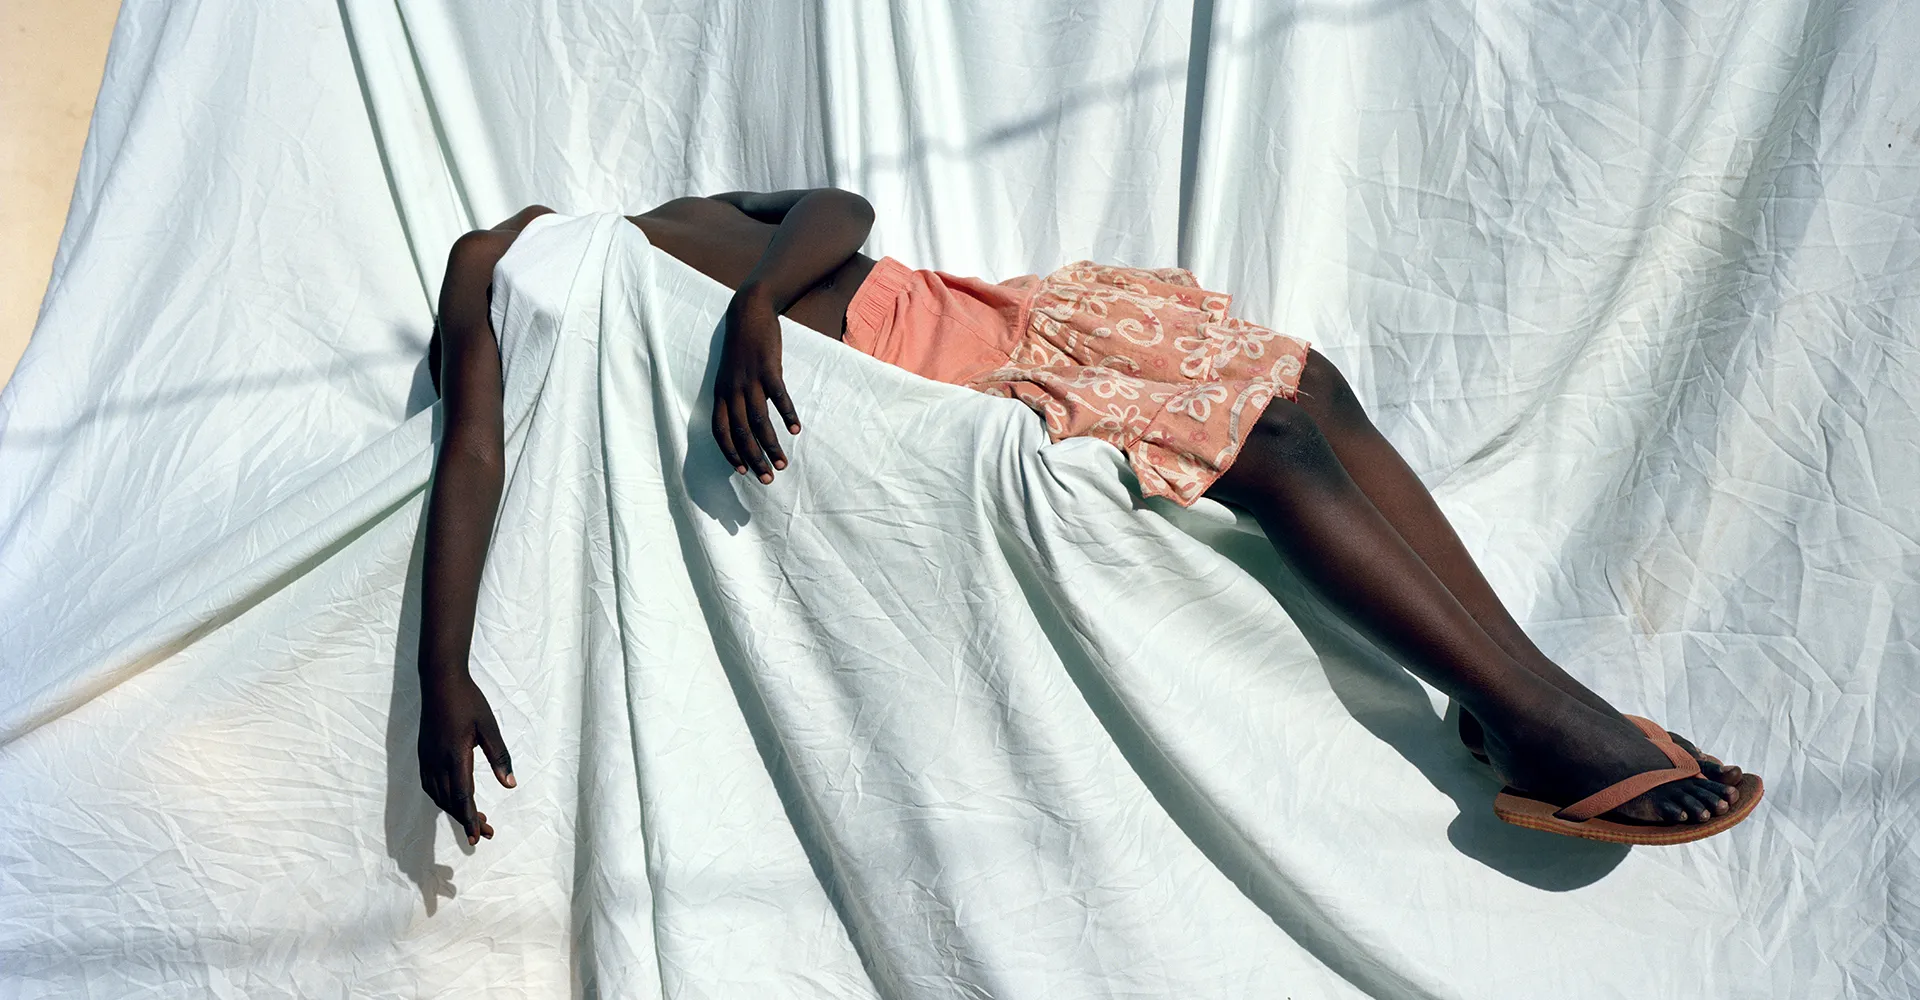 An eye for the uncanny: Viviane Sassen on her concurrent